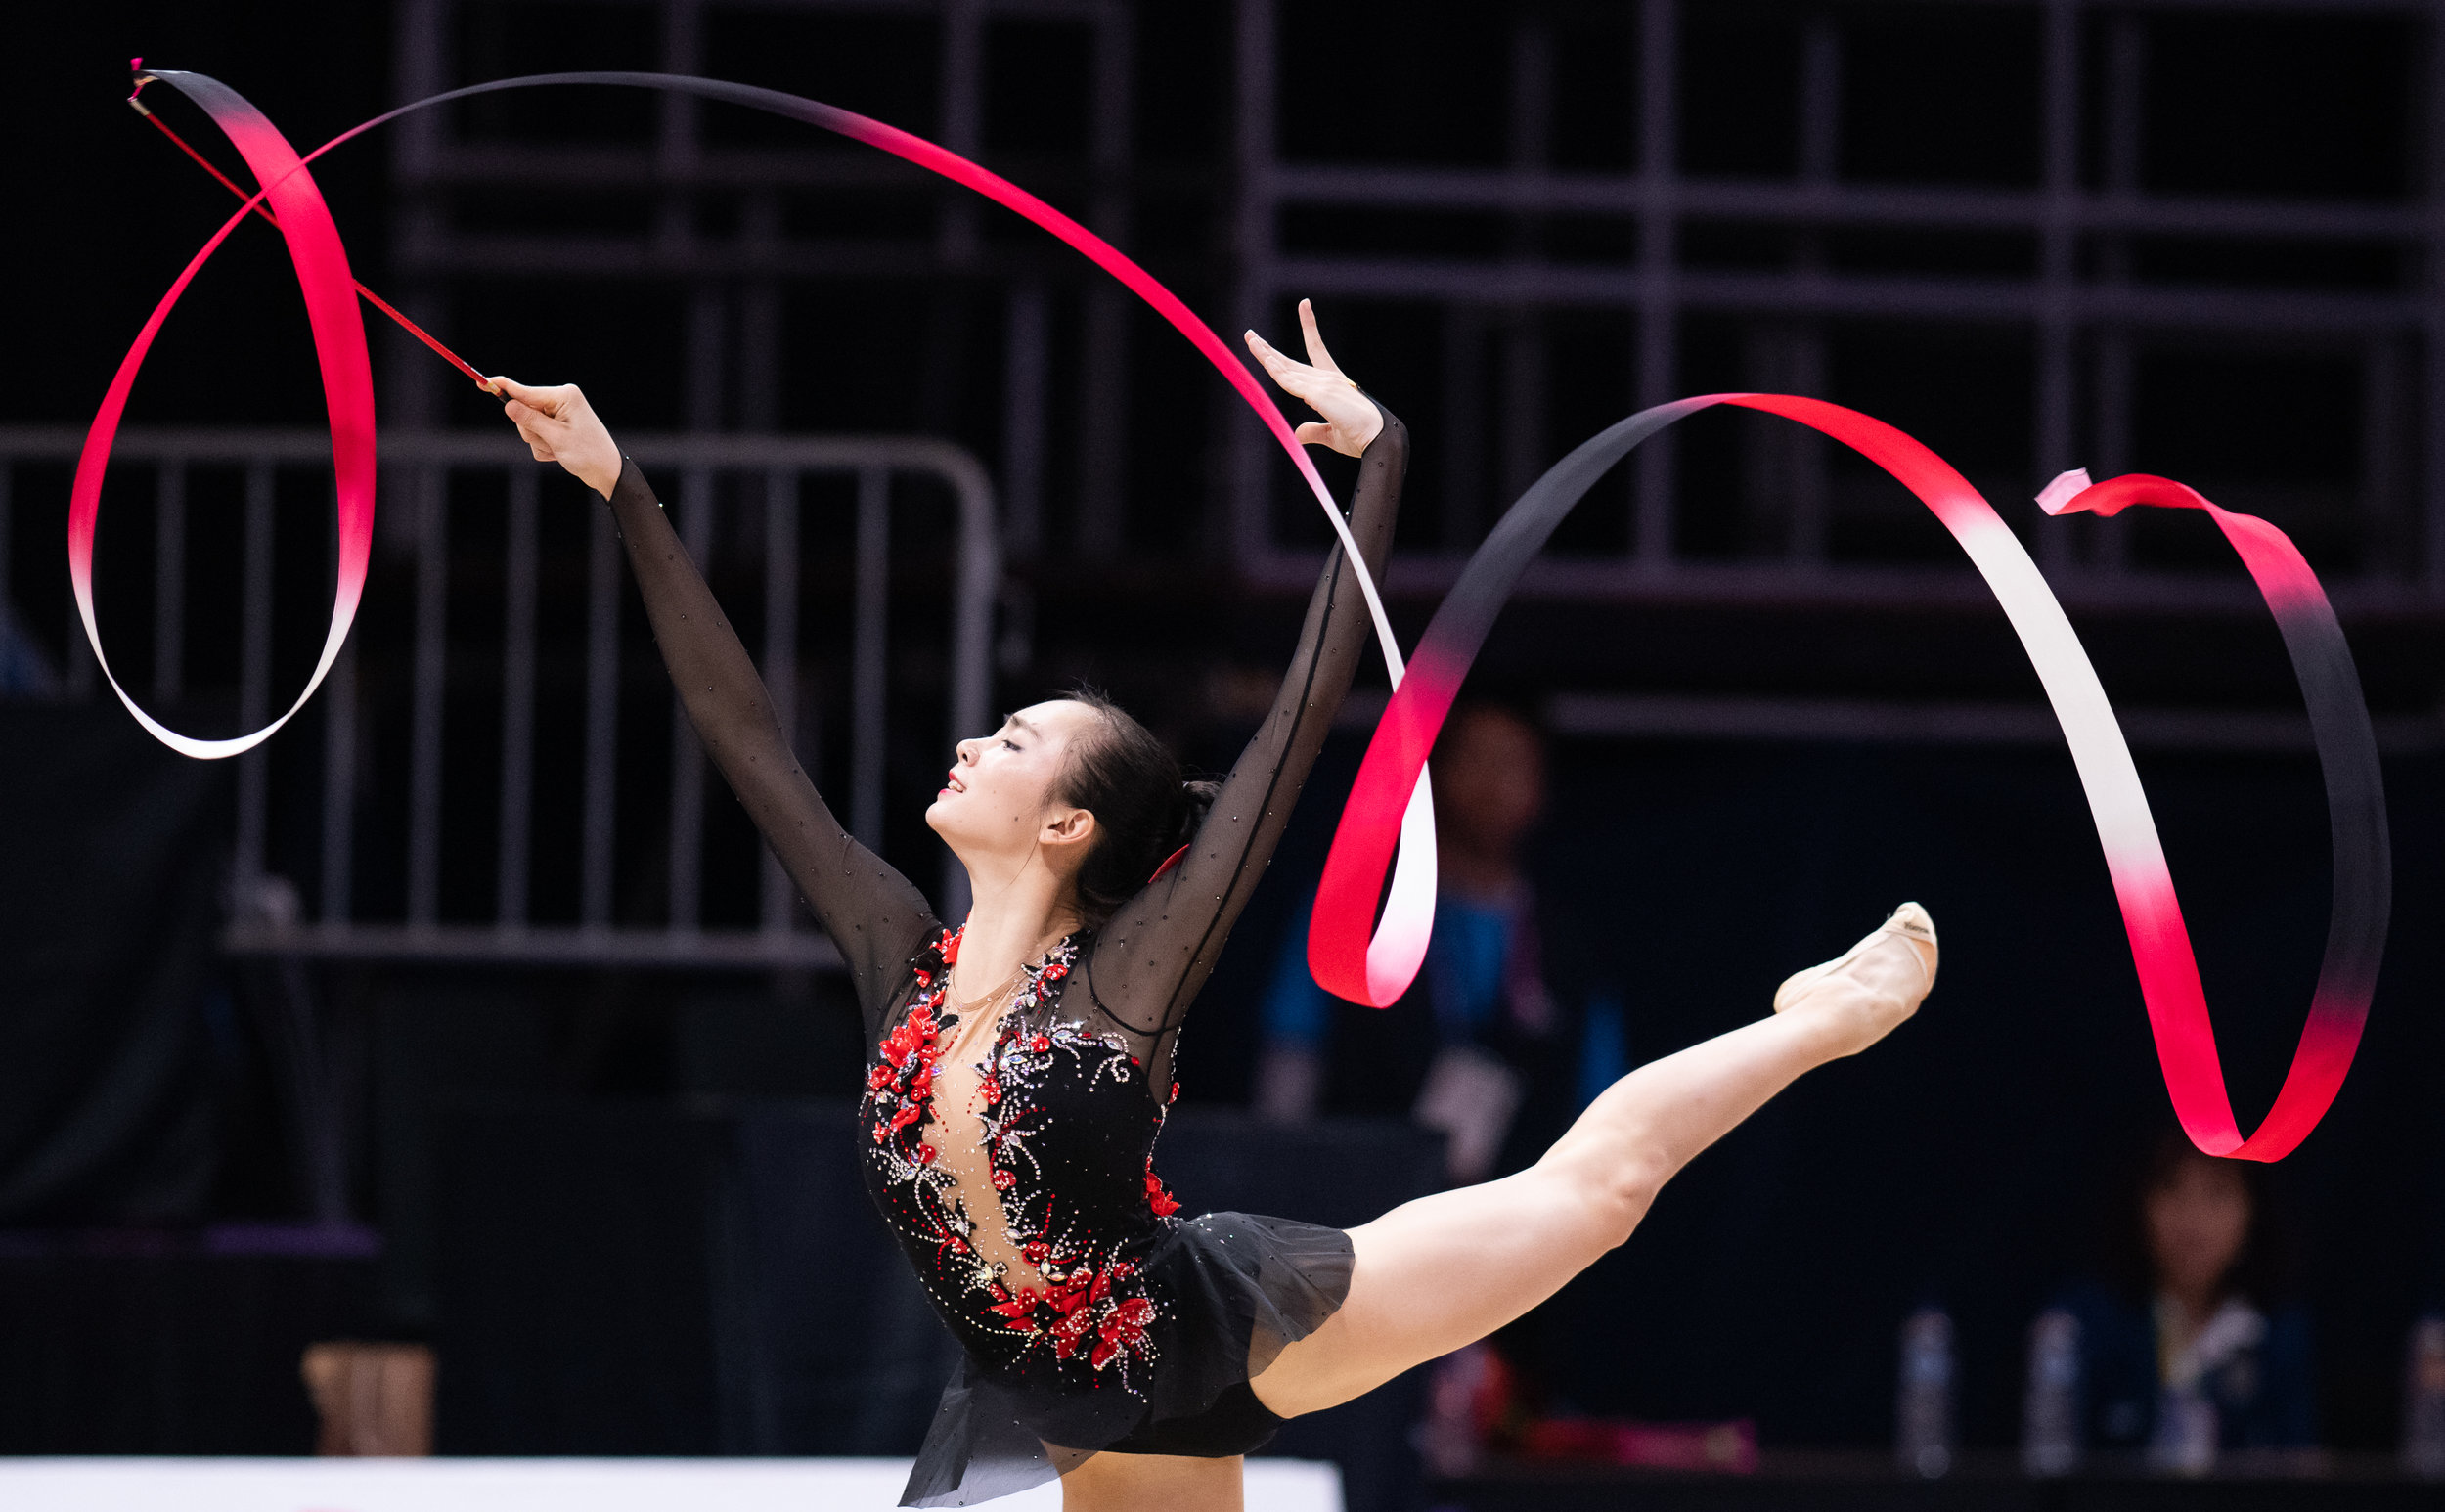 A Chinese Gymnast during her Ribbons routine of the Asian Games at the Jakarta Convention Centre.